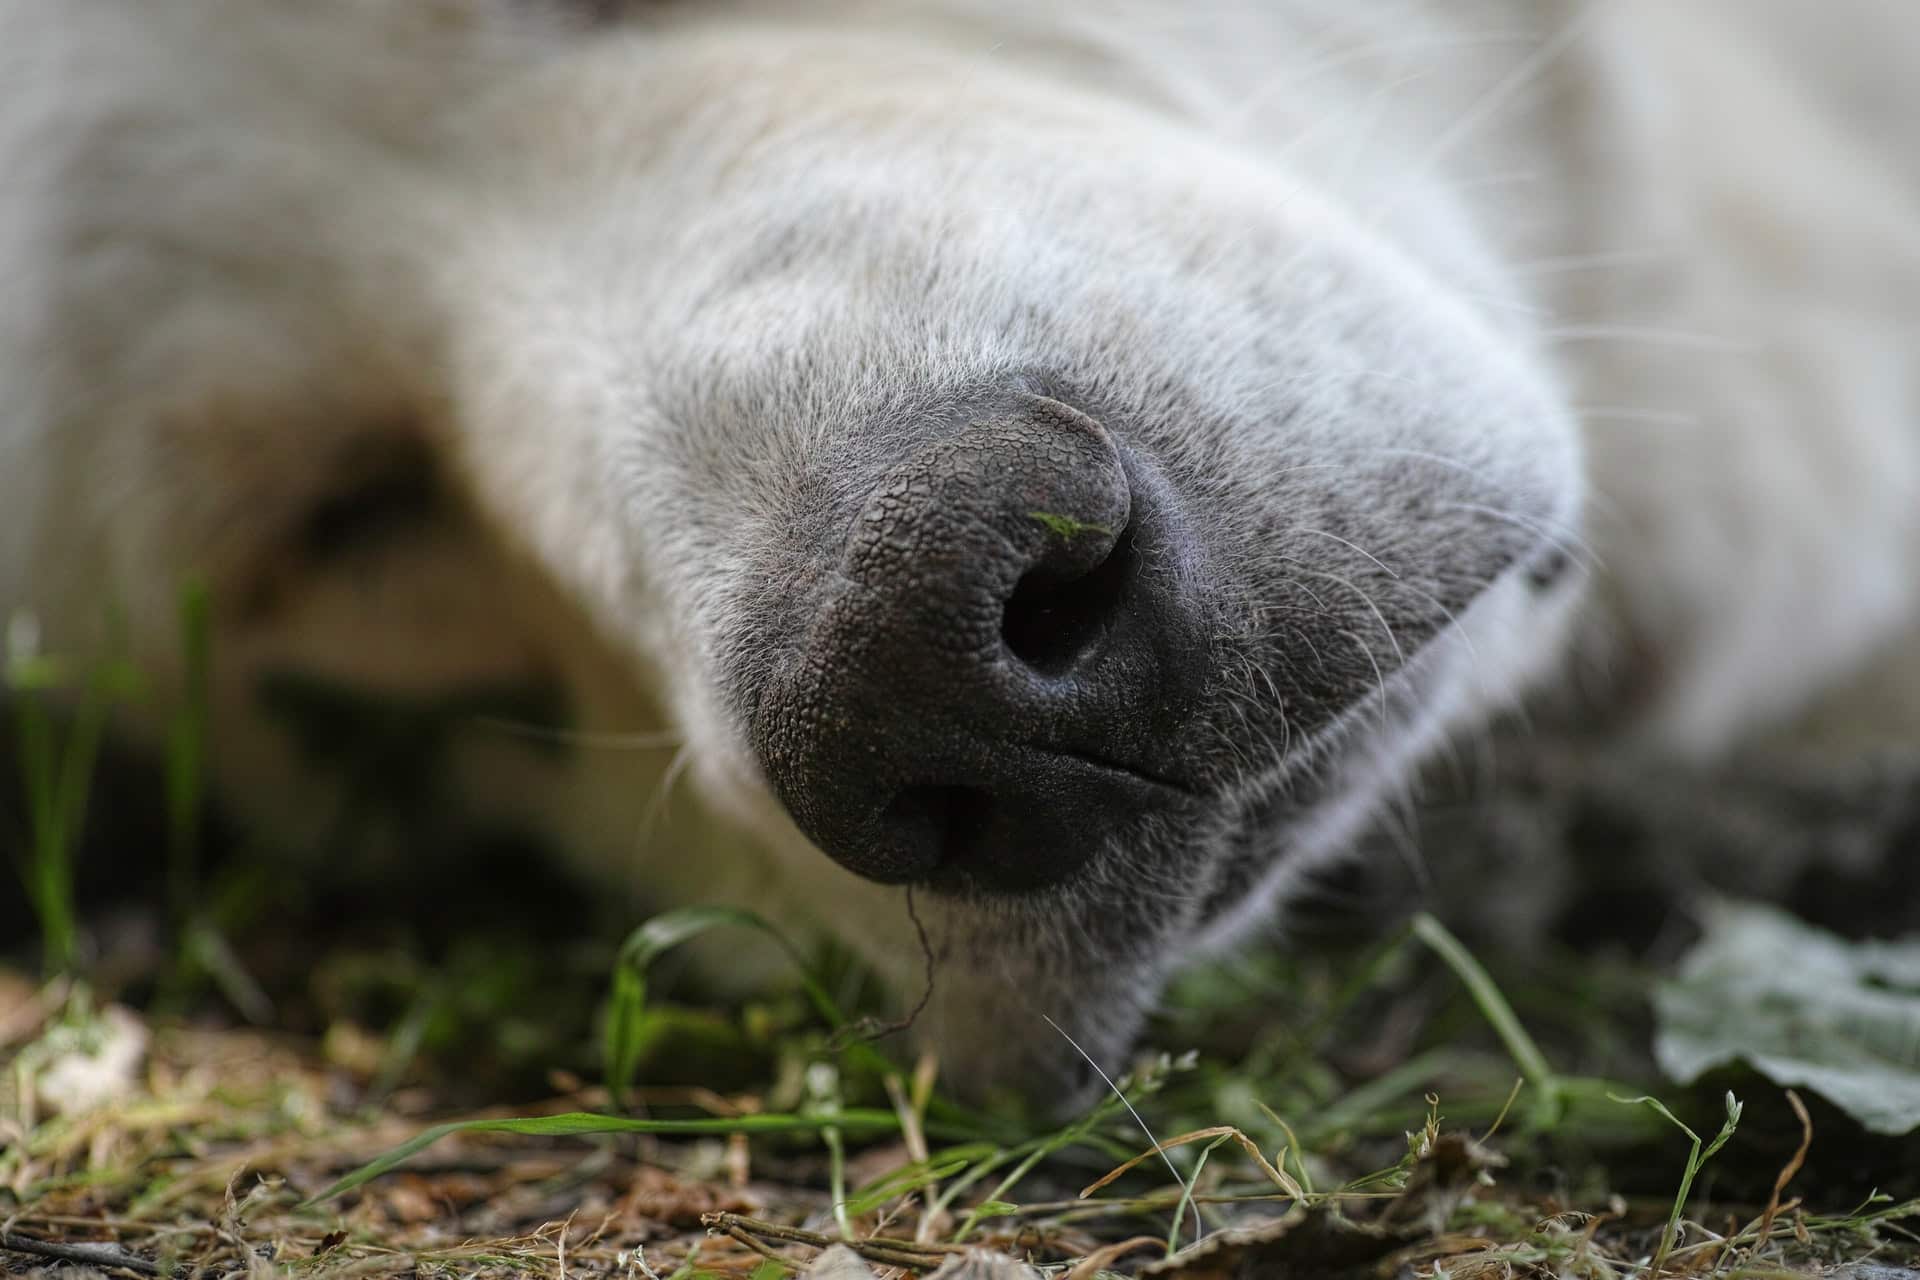 A dog's nose sniffing the ground